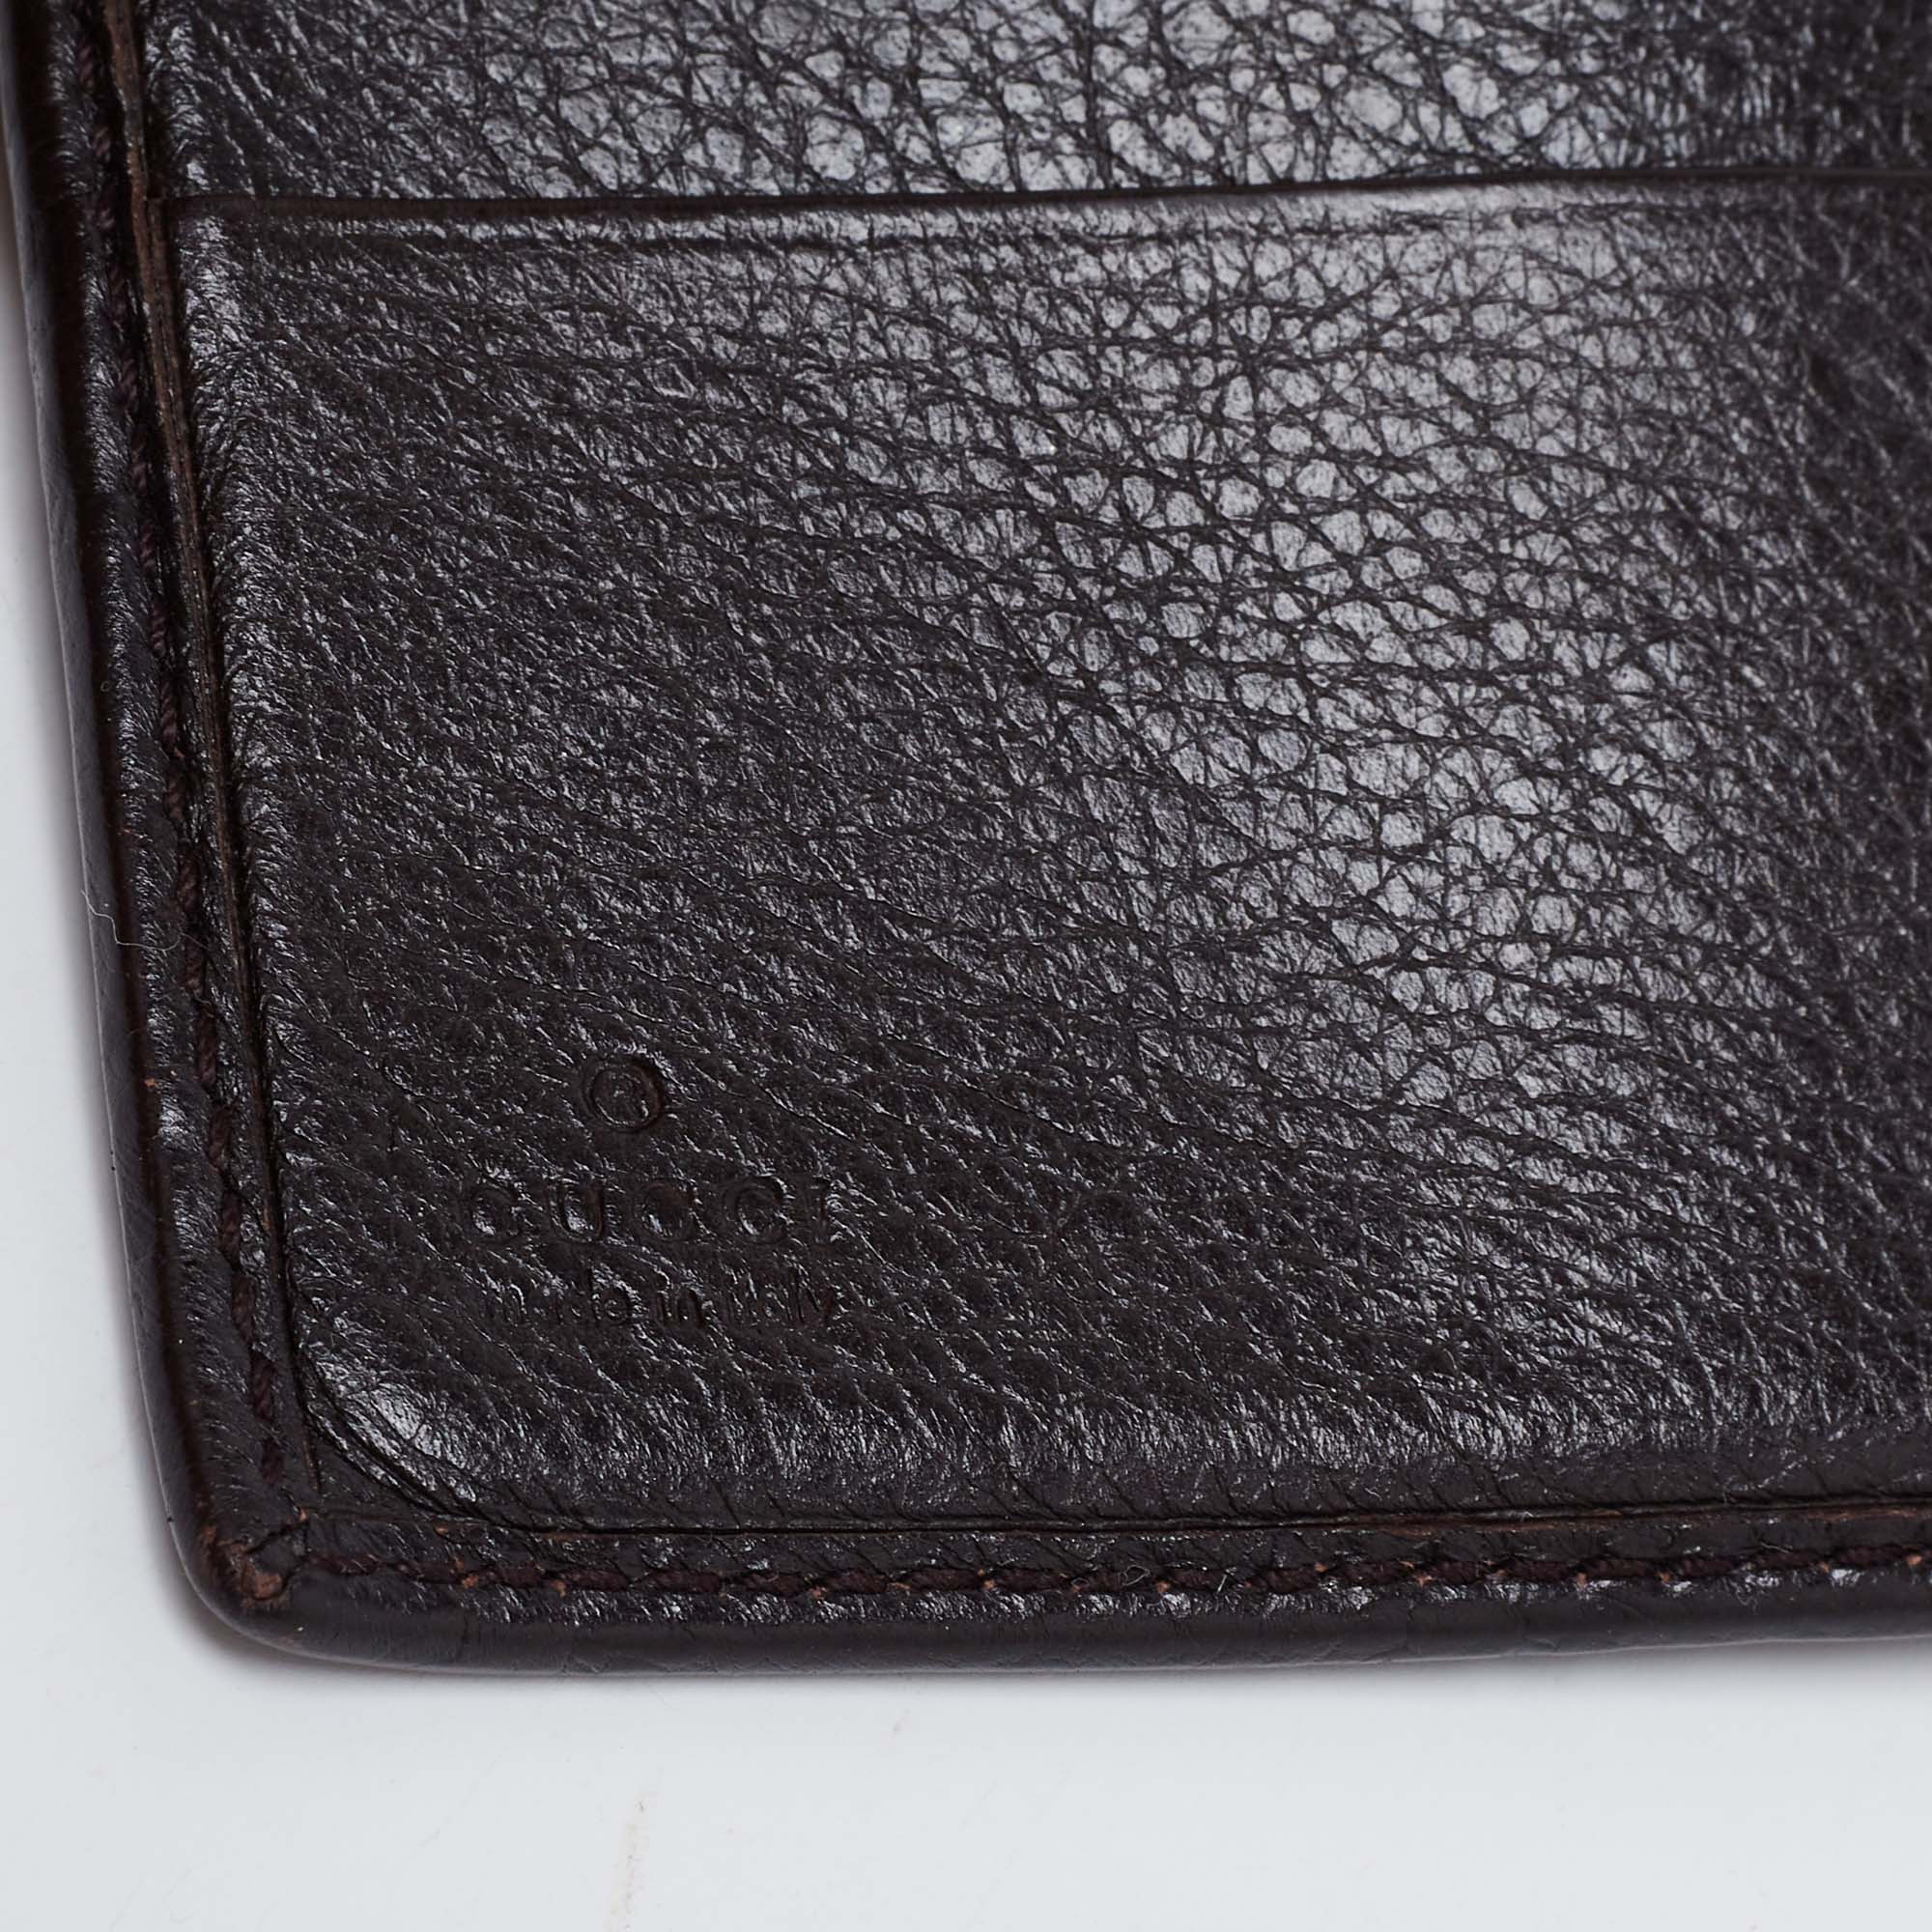 Gucci Dark Brown Guccissima Leather French Wallet